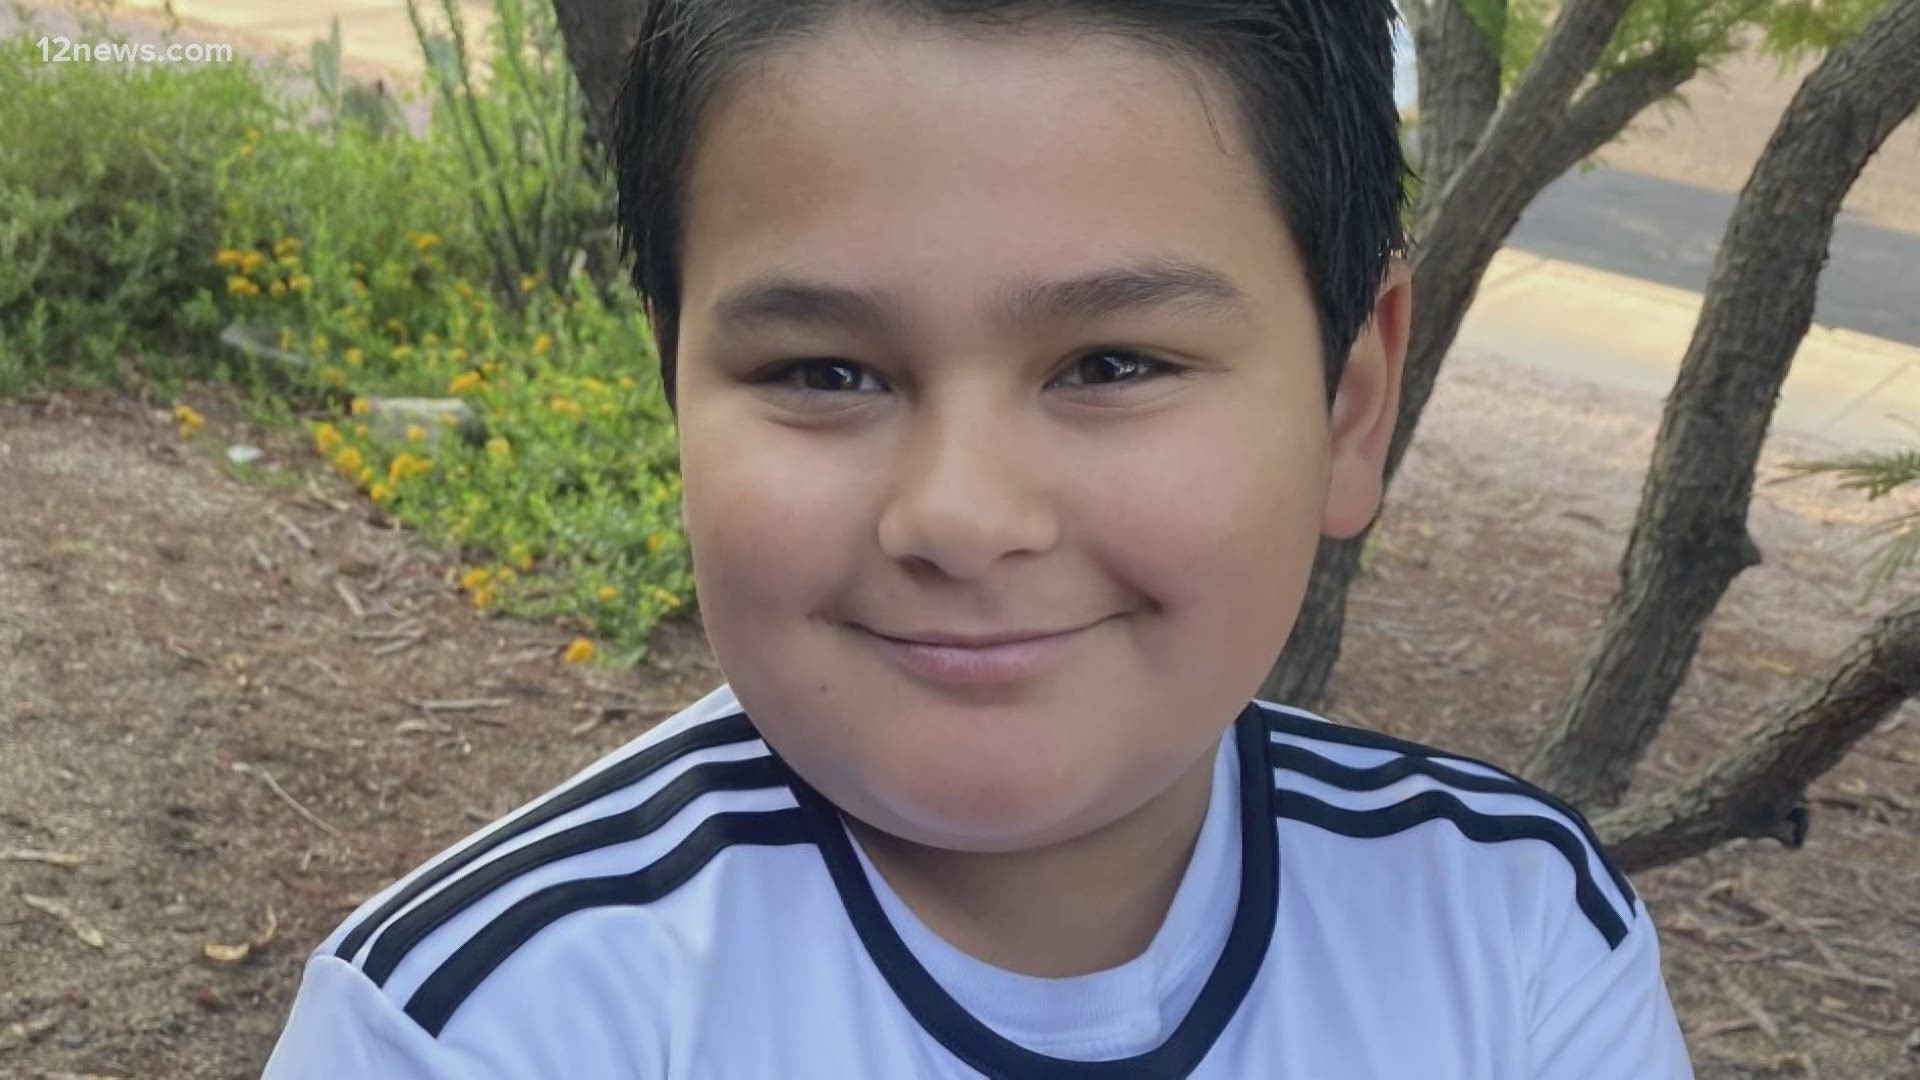 It all started with an eye exam. Jesse Silva, 9, and his parents learned that he had a tumor on his optic nerve during an eye appointment.